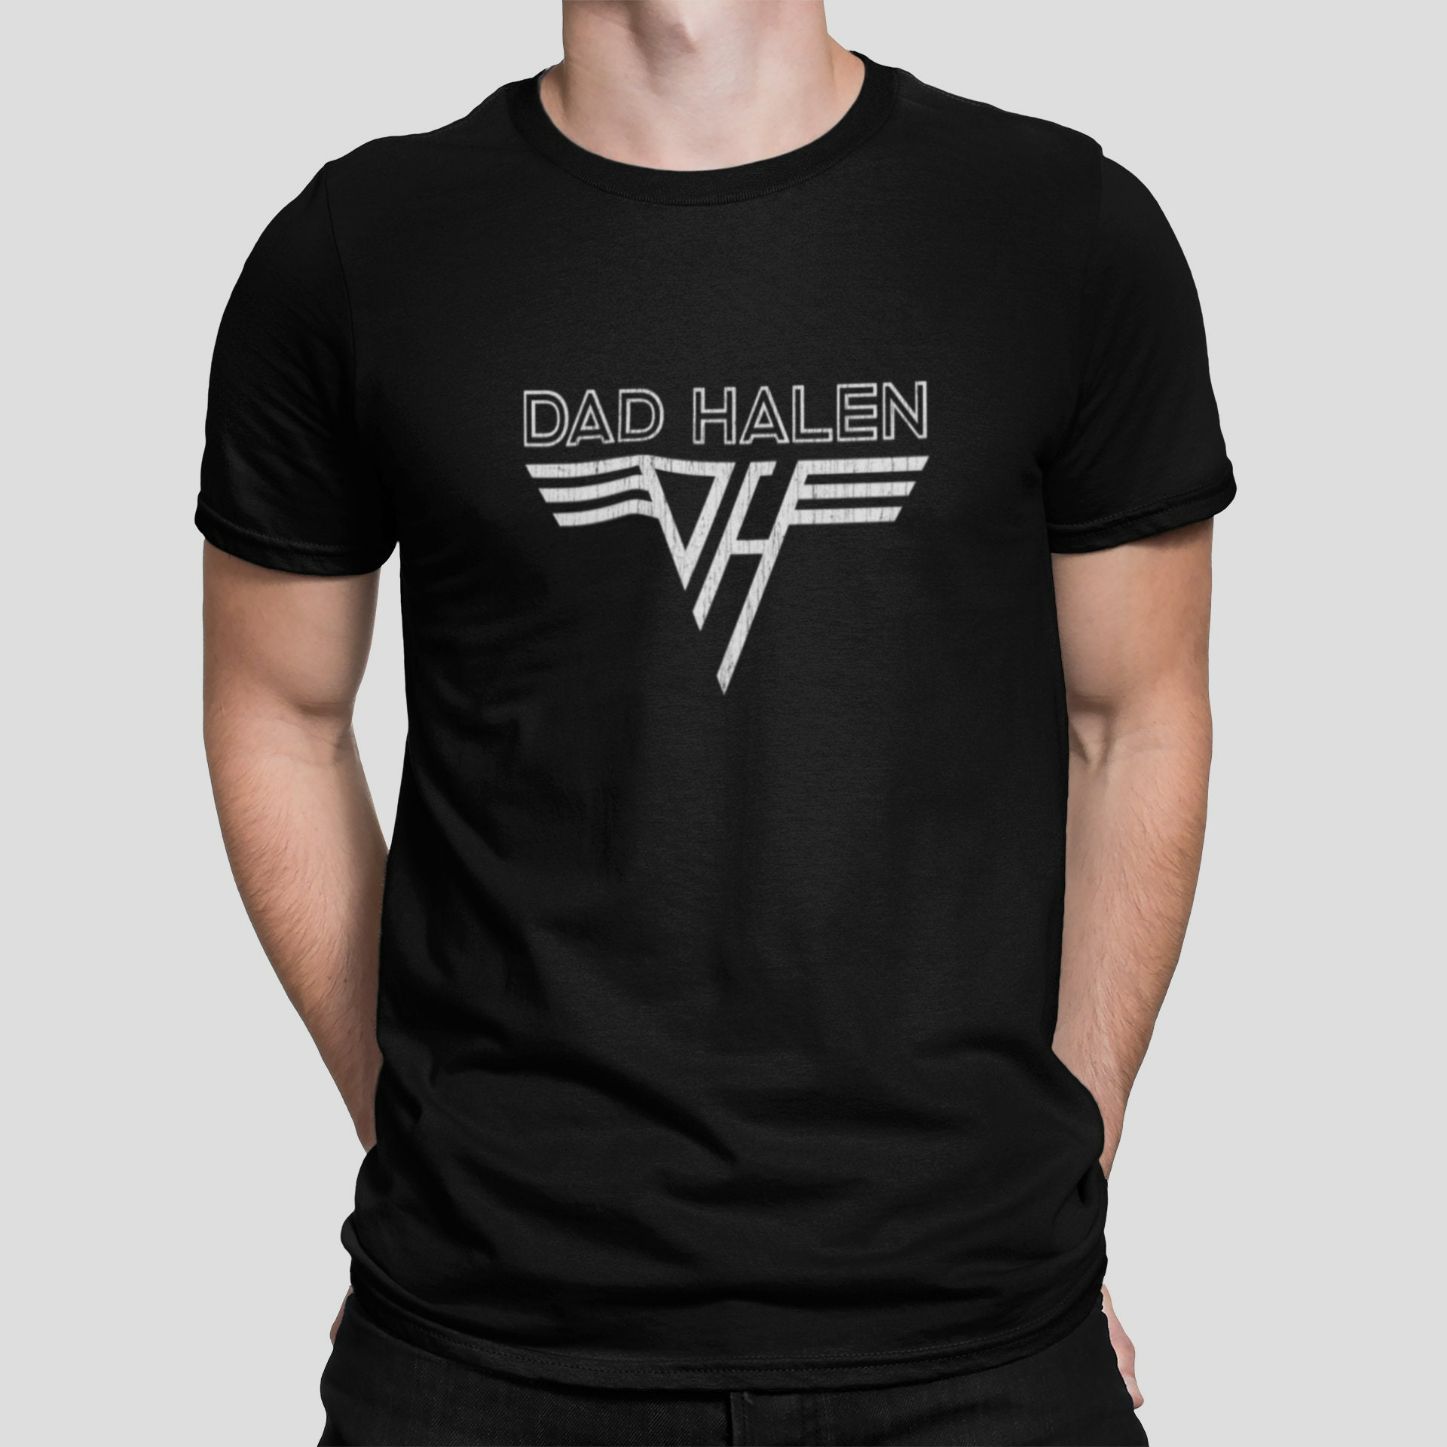 Fathers Day Gift Van Halen Inspired Band T-Shirt